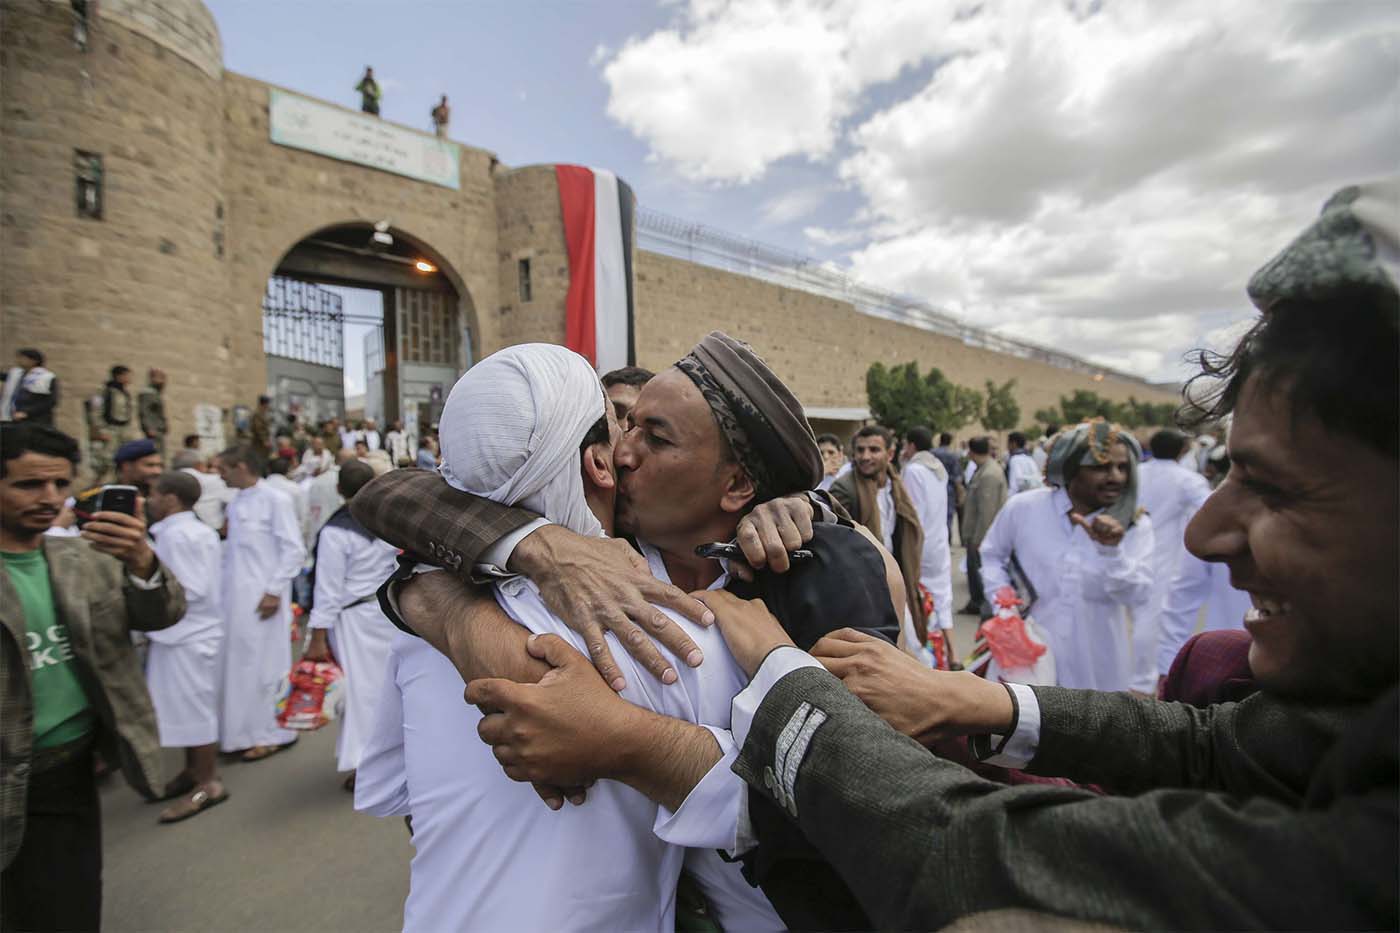 A Yemeni detainee is greeted by his relative and friends after his release from a prison controlled by Huthi rebels, in Sanaa